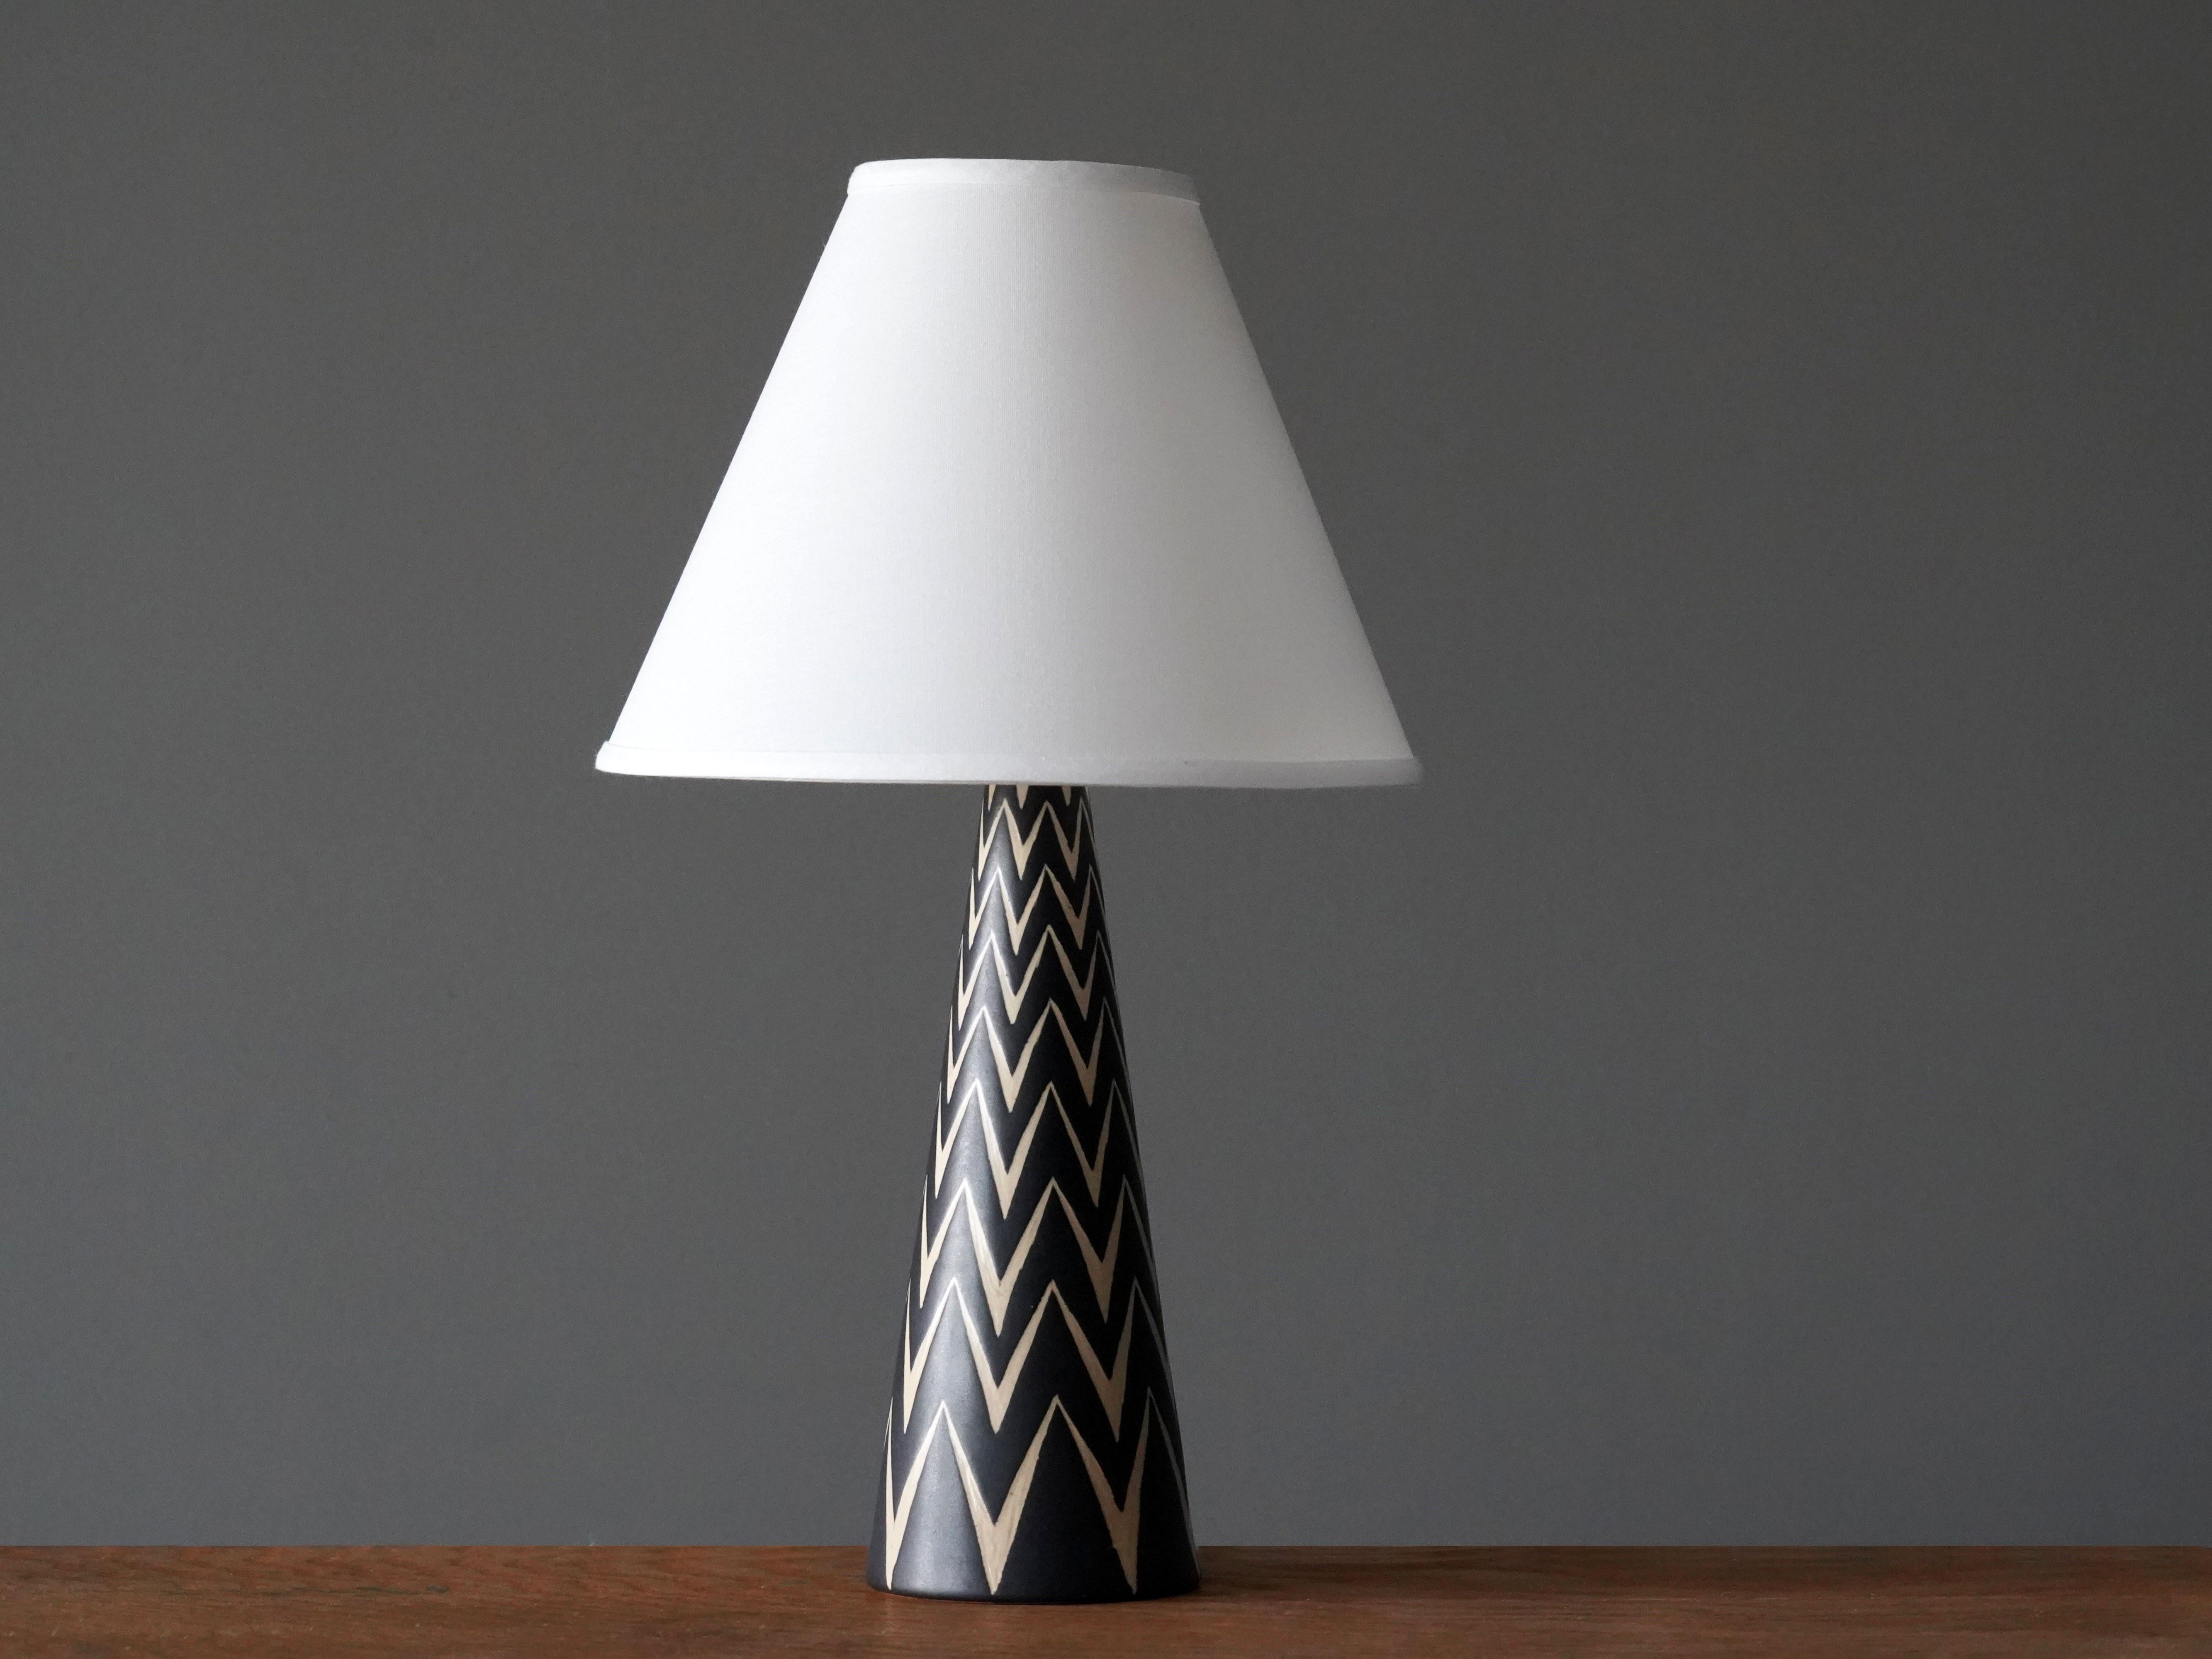 A table lamp produced by Michael Andersen Keramik. In hand painted stoneware. Sold without lampshade.

Other ceramicists of the period include Axel Salto, Arne Bang, Carl-Harry Stålhane, and Berndt Friberg.